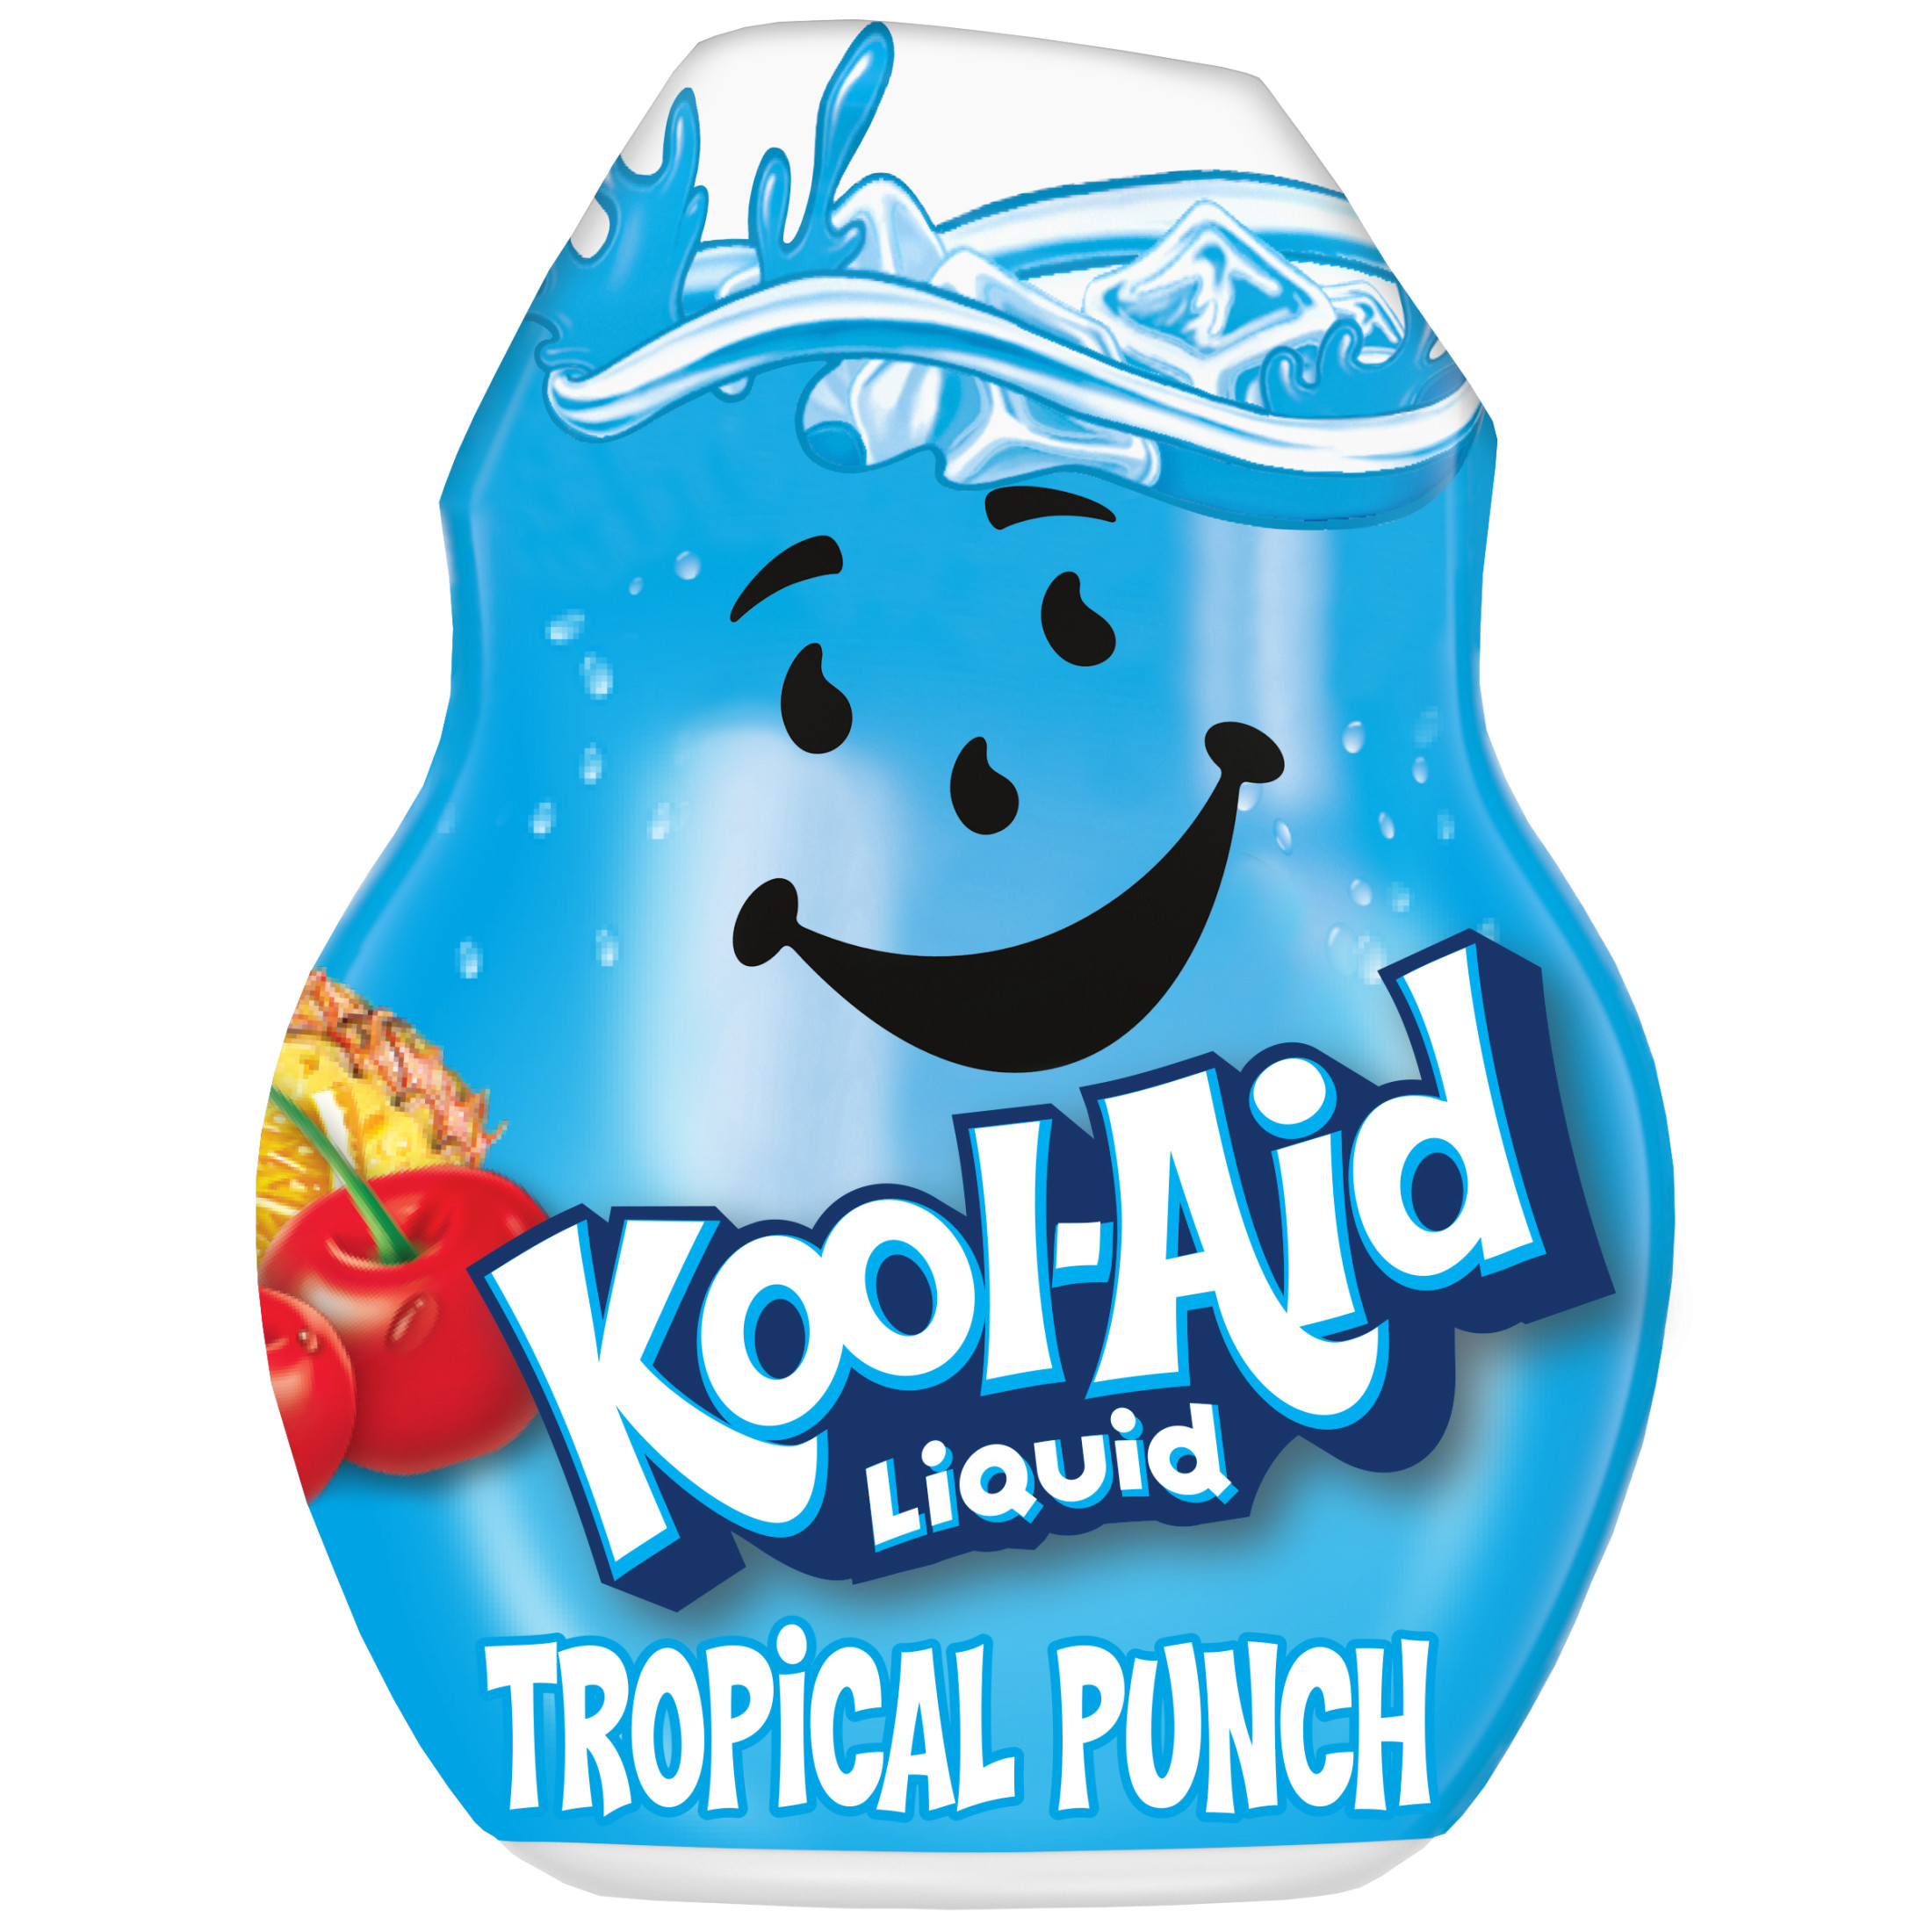 Kool-Aid Liquid Tropical Punch Naturally Flavored Soft Drink Mix, 1.62 fl oz Bottle - image 1 of 10